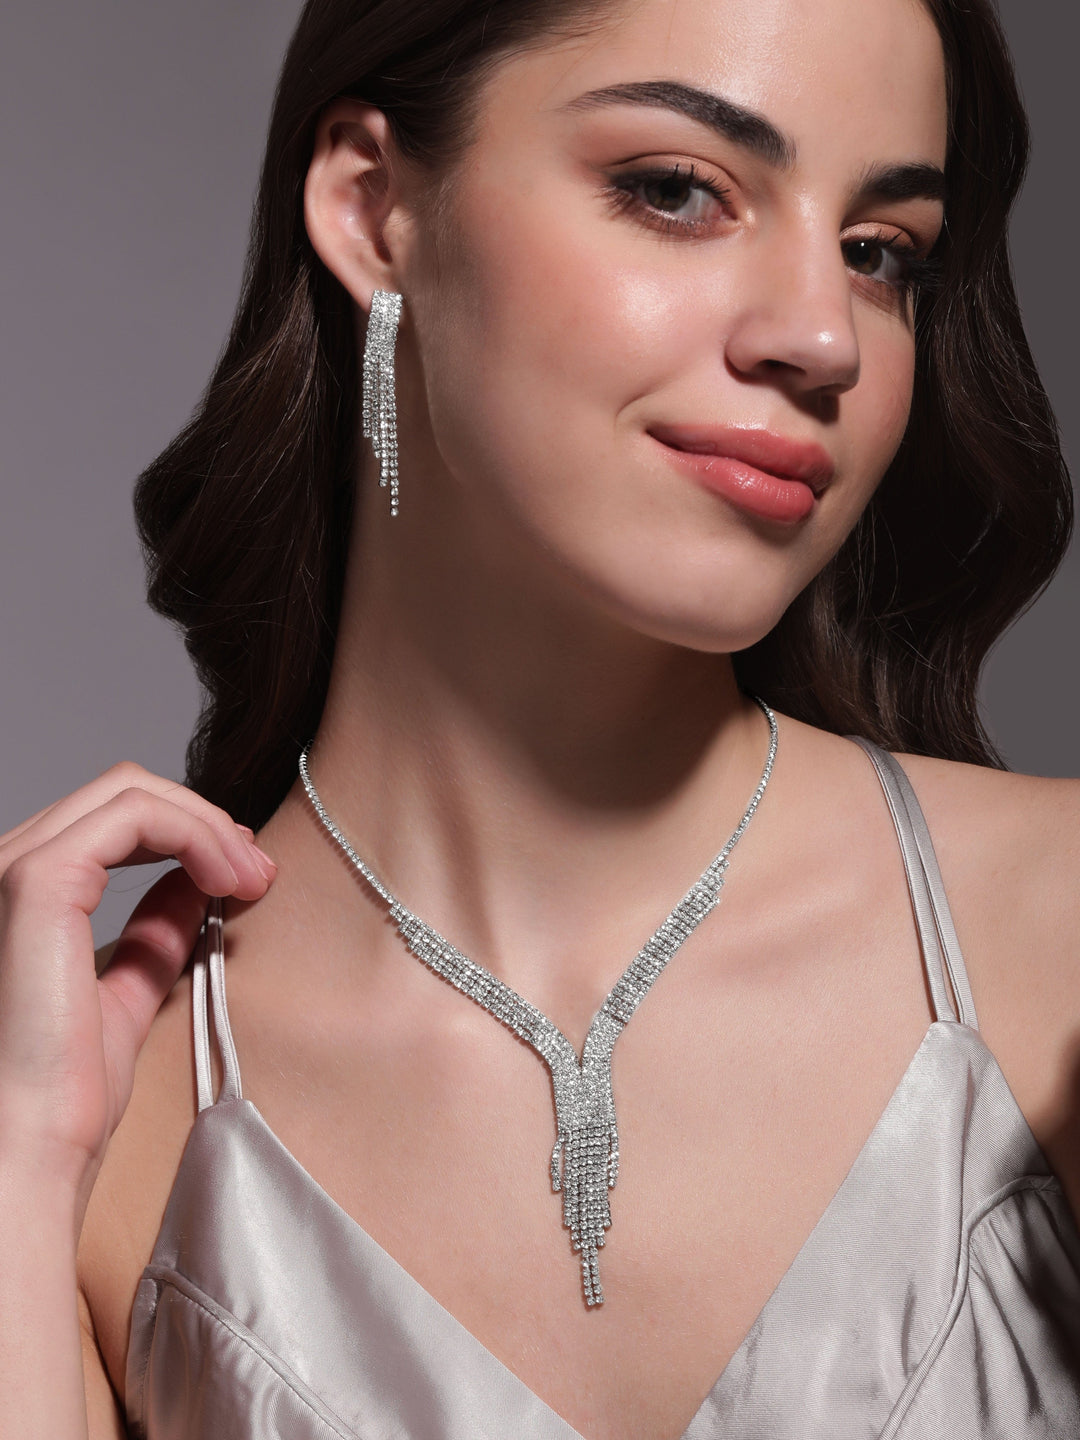 Rubans Rhodium plated Silver Crystal Studded Necklace Set Jewellery Sets